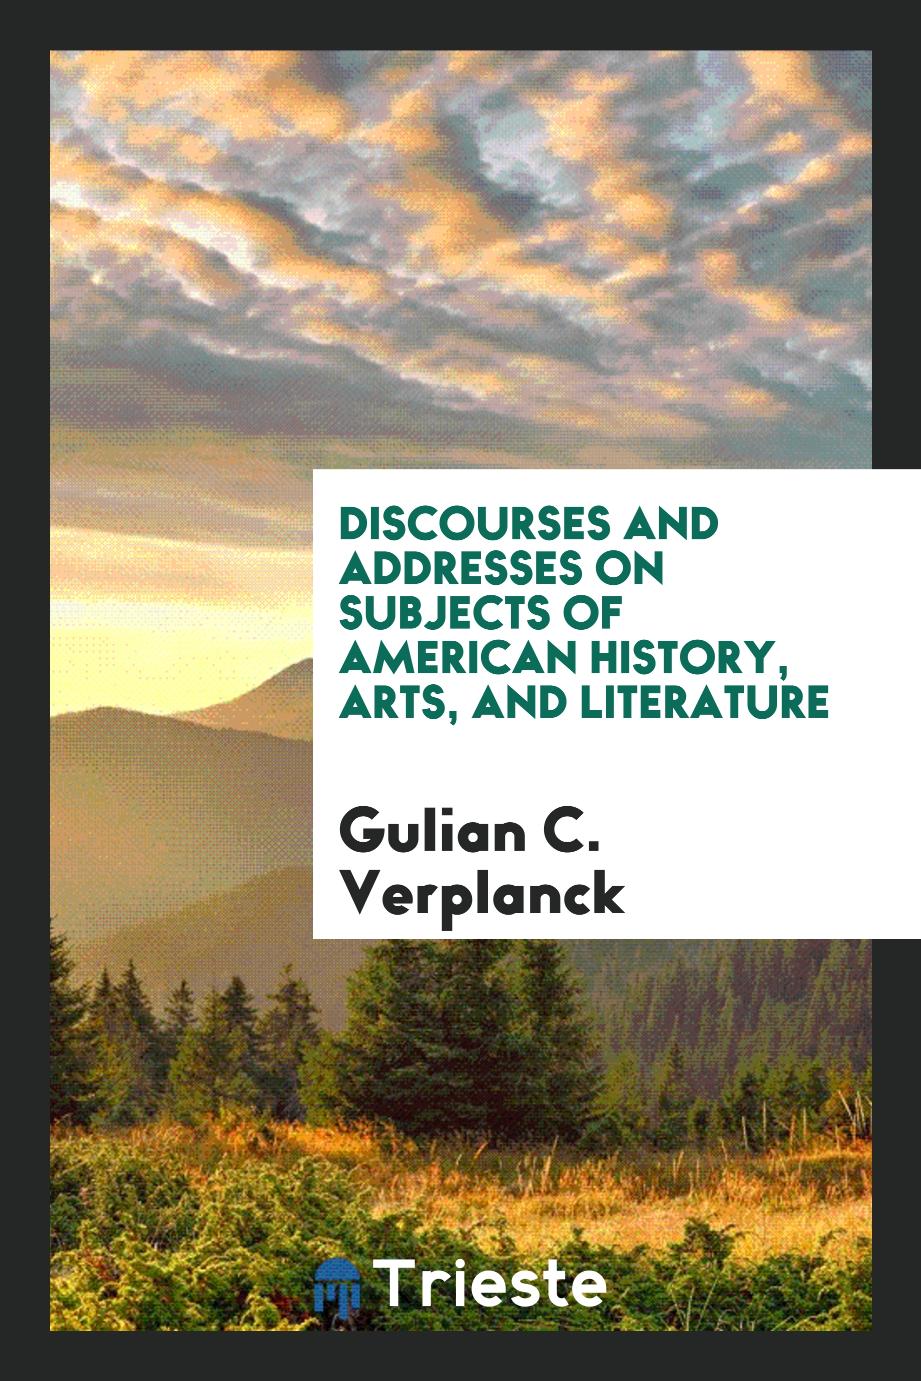 Discourses and addresses on subjects of American history, arts, and literature